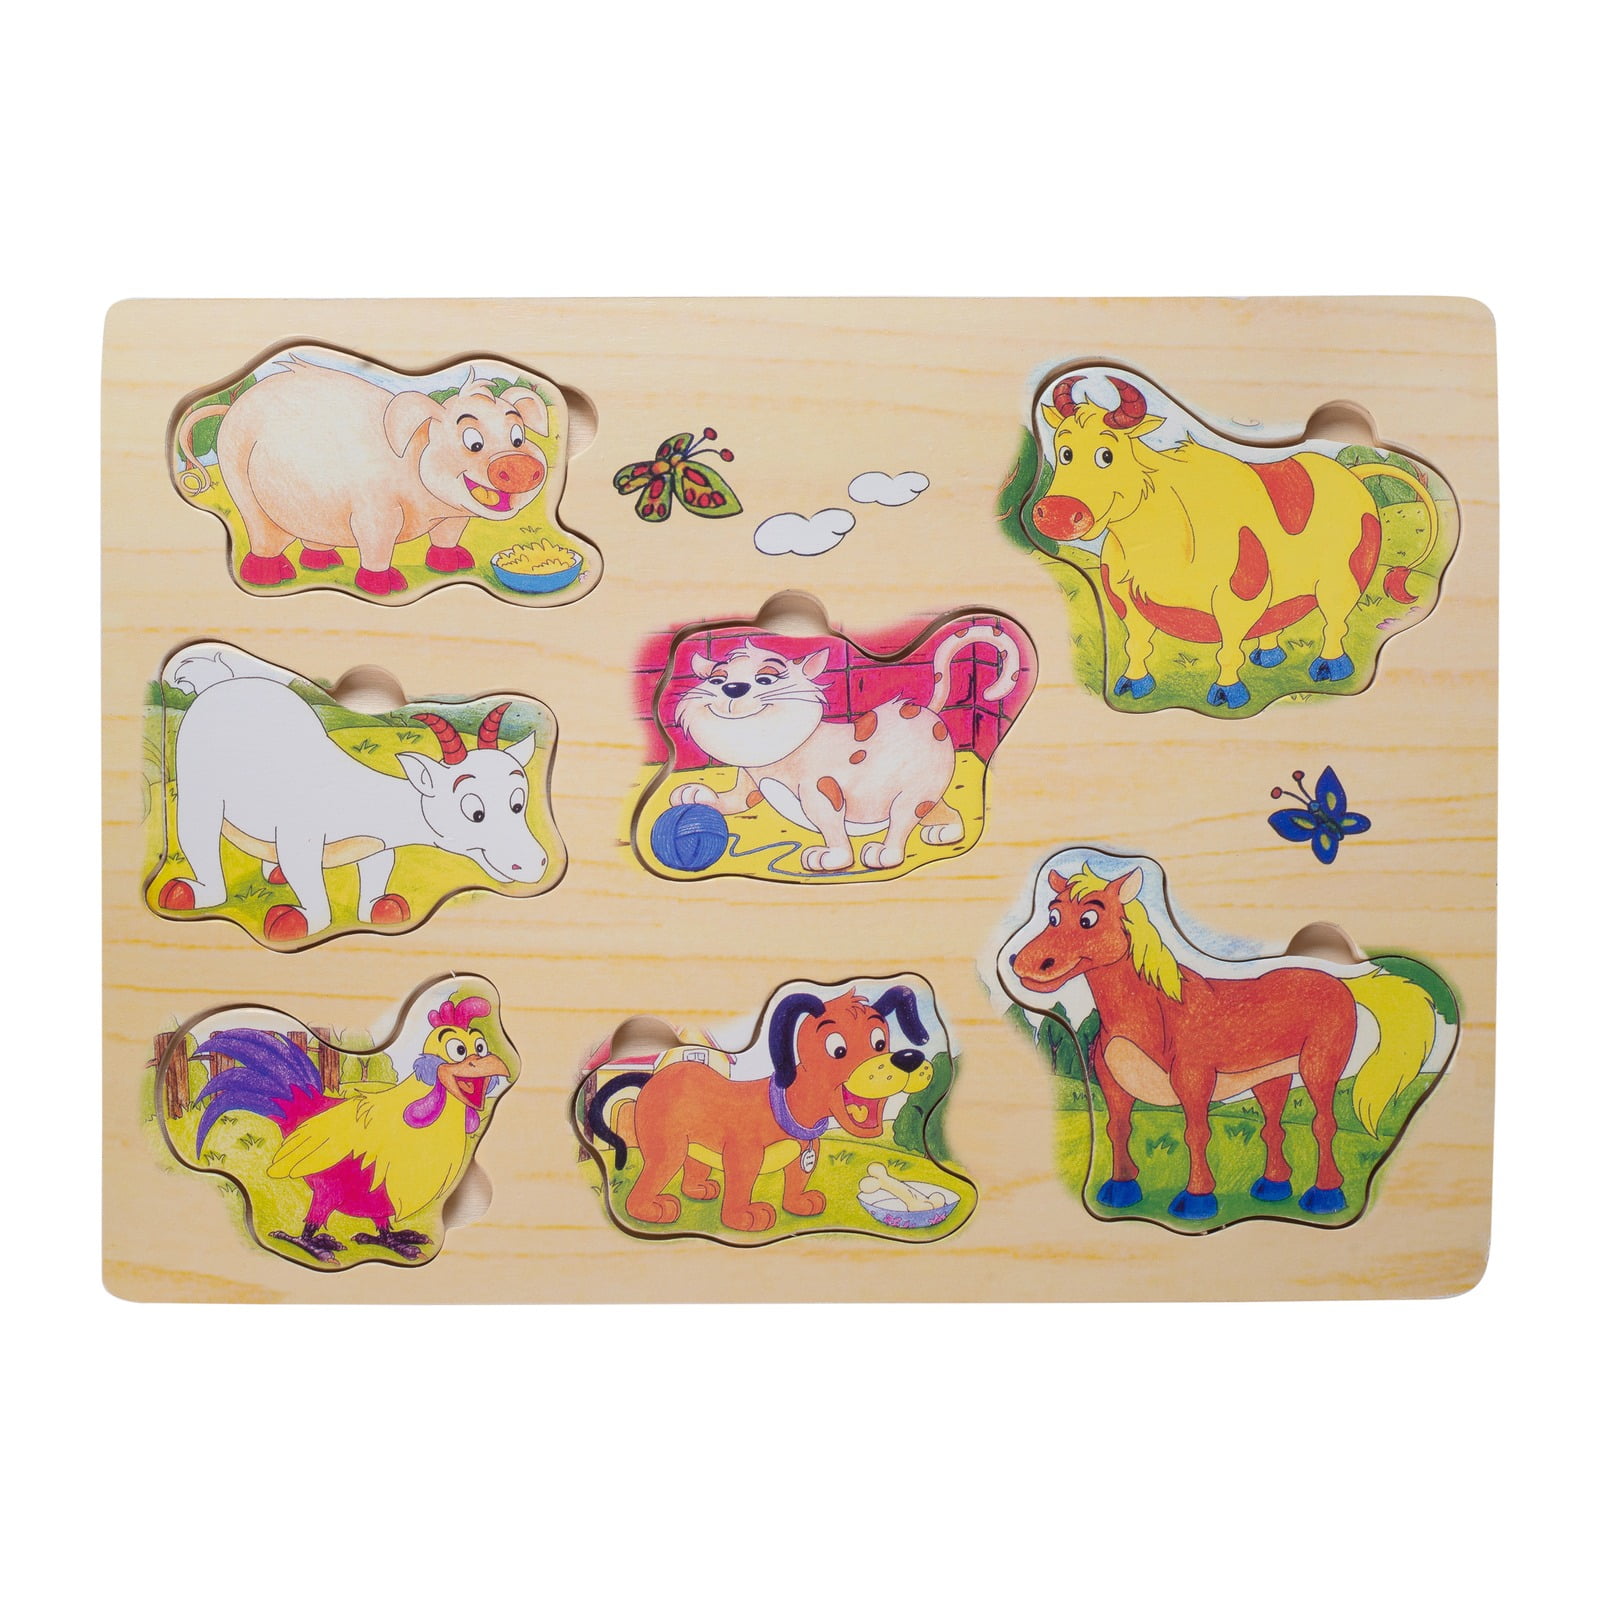 Eliiti Wooden Chunky Puzzle Set for Toddlers 2 to 4 Years Farm Safari Animals 